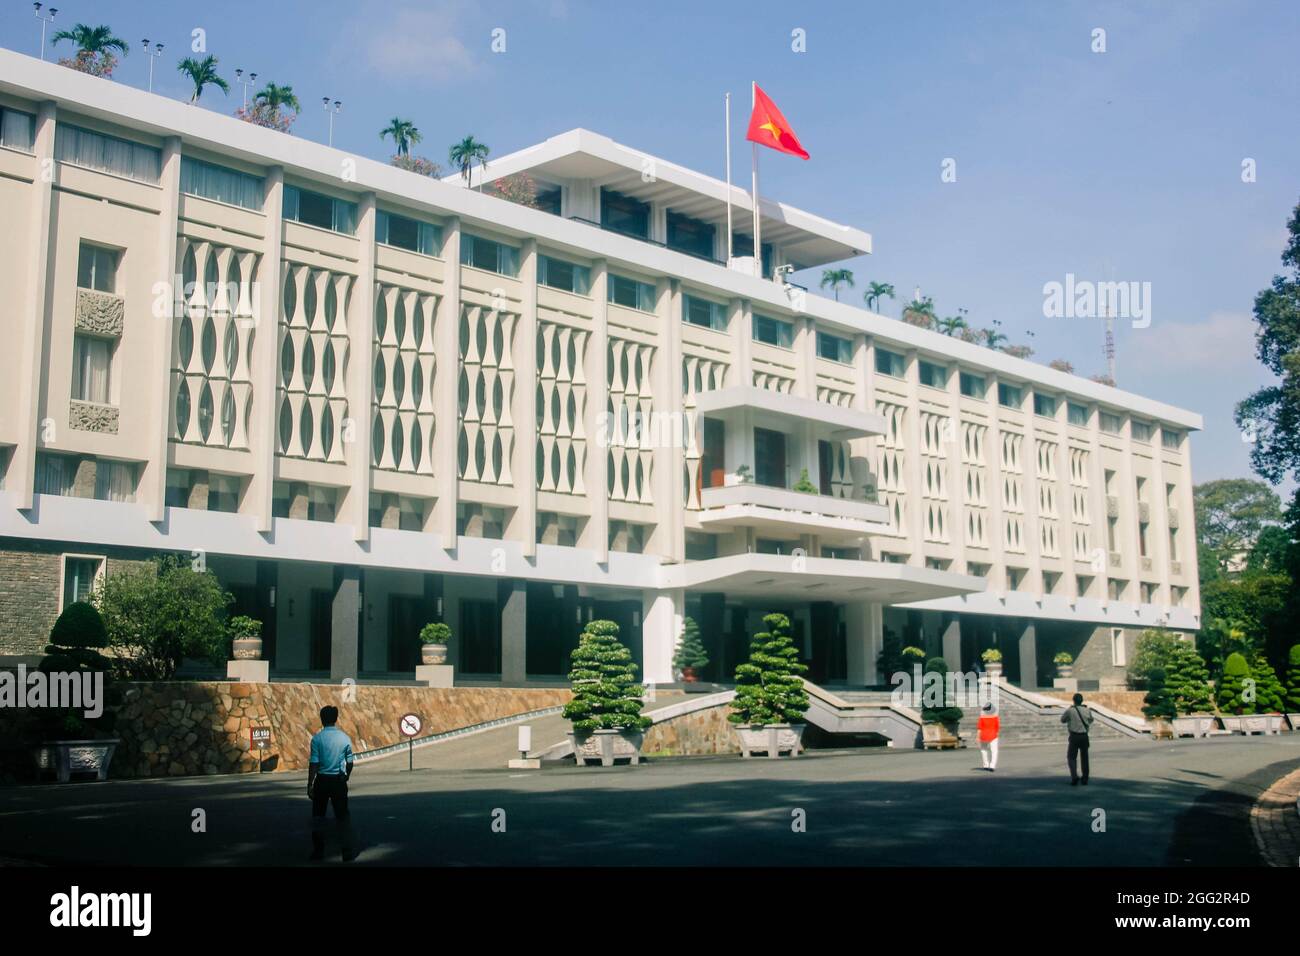 Ho Chi Minh, Vietnam - September 9 2016: General view of Independence Palace or Reunification Palace. Independence Palace is a landmark in Ho Chi Minh Stock Photo